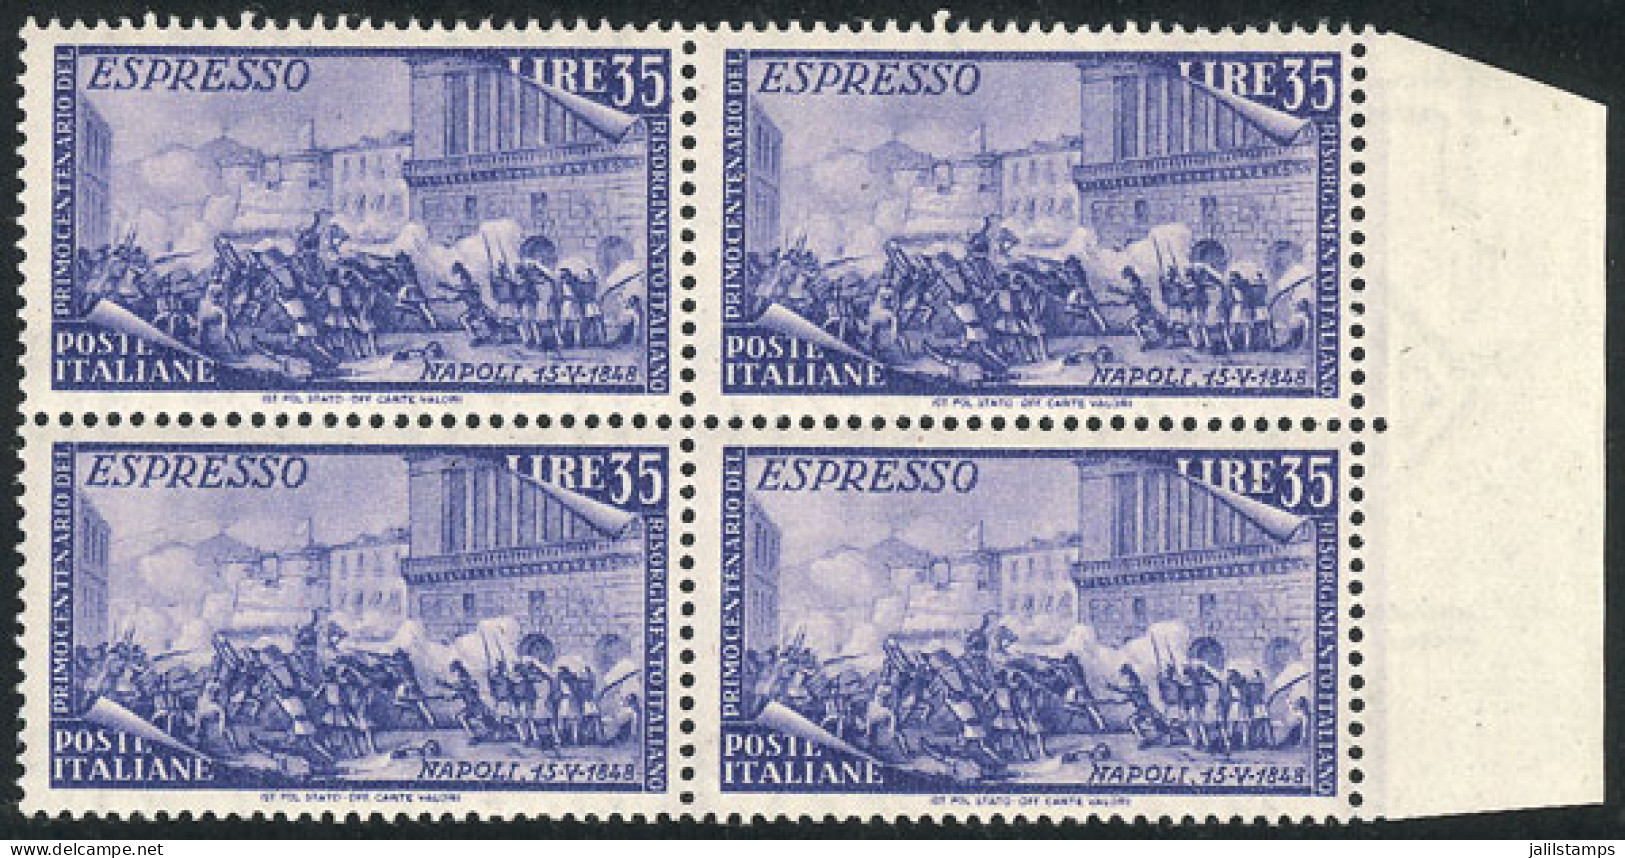 ITALY: Yvert 35, 1948 Risorgimento, MNH Block Of 4 With Sheet Margin, Excellent Quality, Catalog Value Euros 720. - Zonder Classificatie